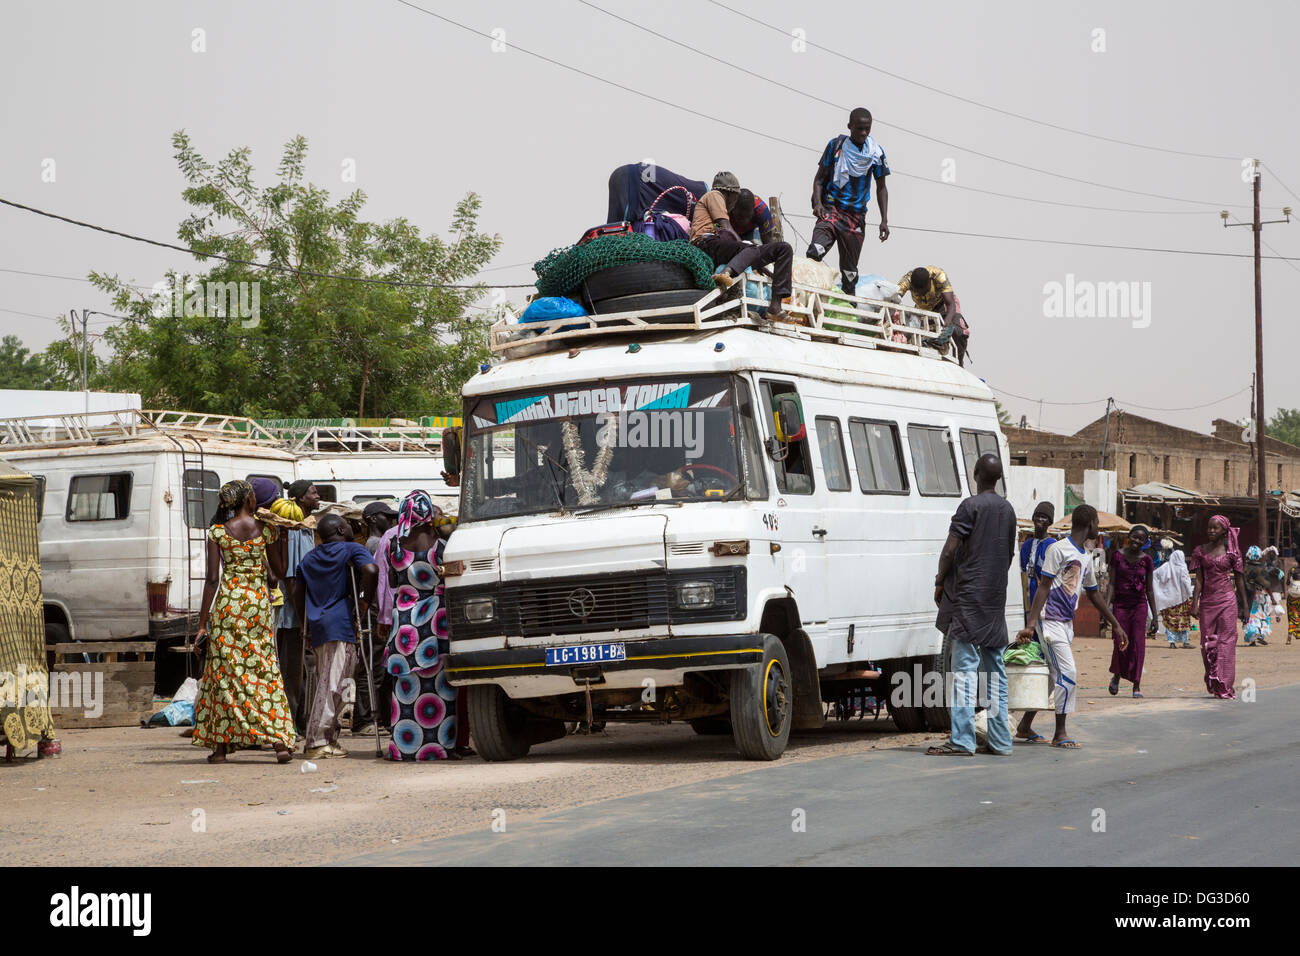 Senegal, Touba. Local Transport and Traffic Safety. Young Men load goods on top; some passengers will ride there. Stock Photo